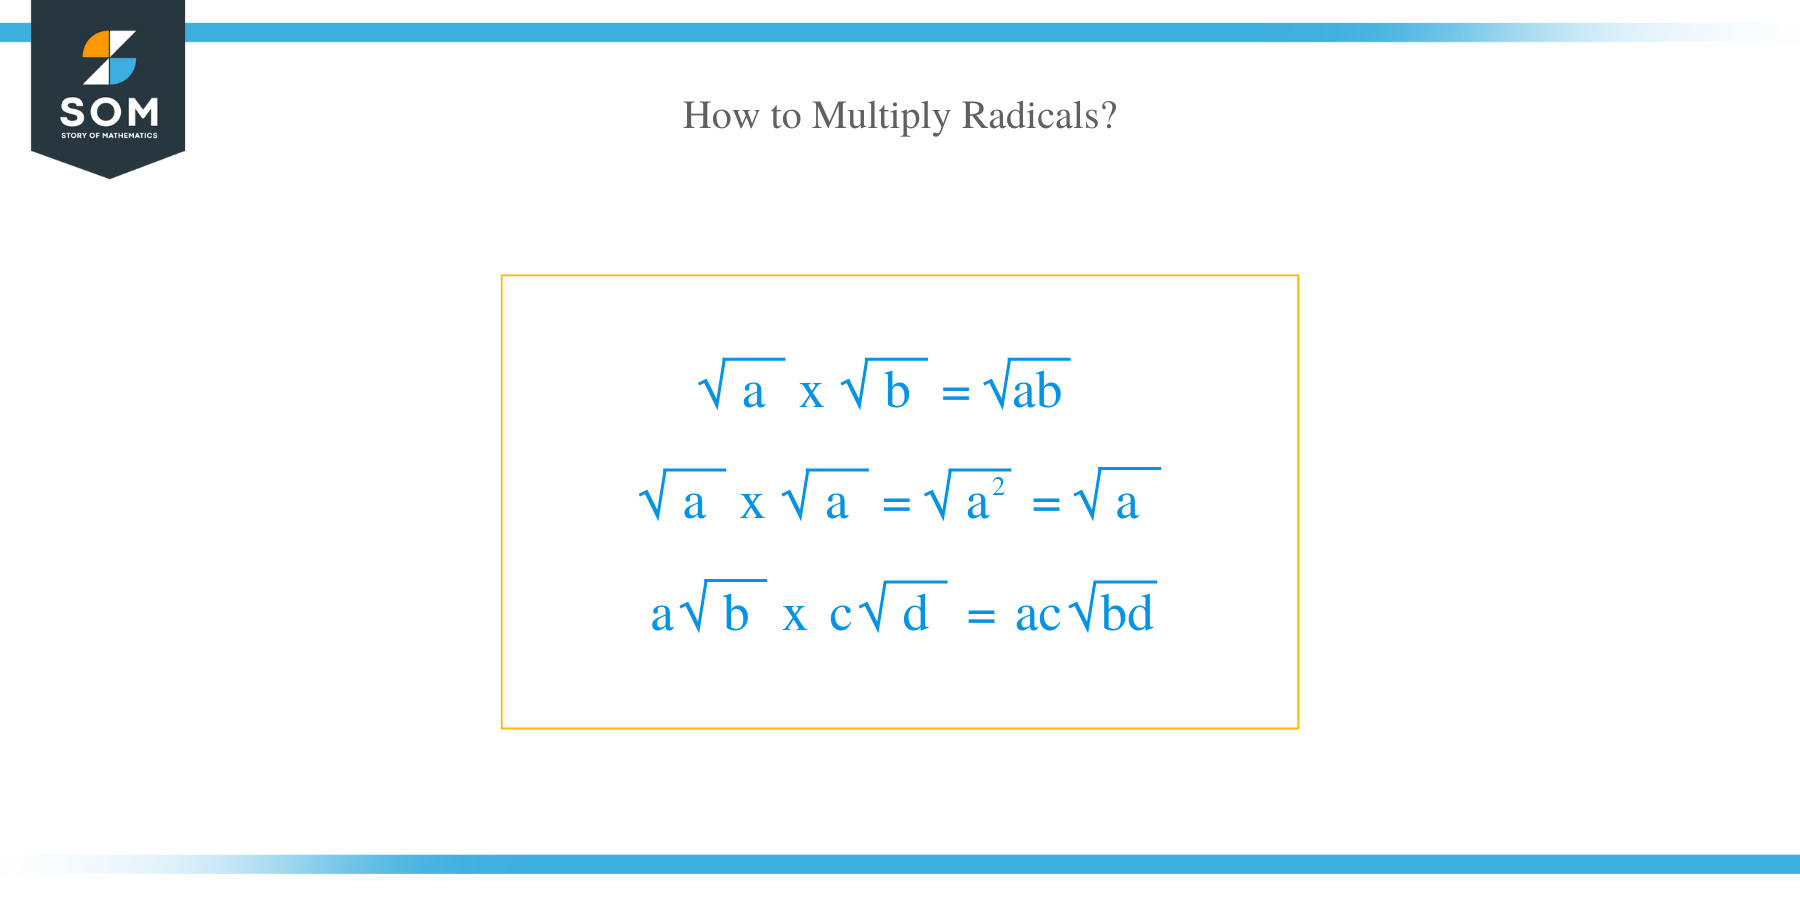 How to Multiply Radicals?